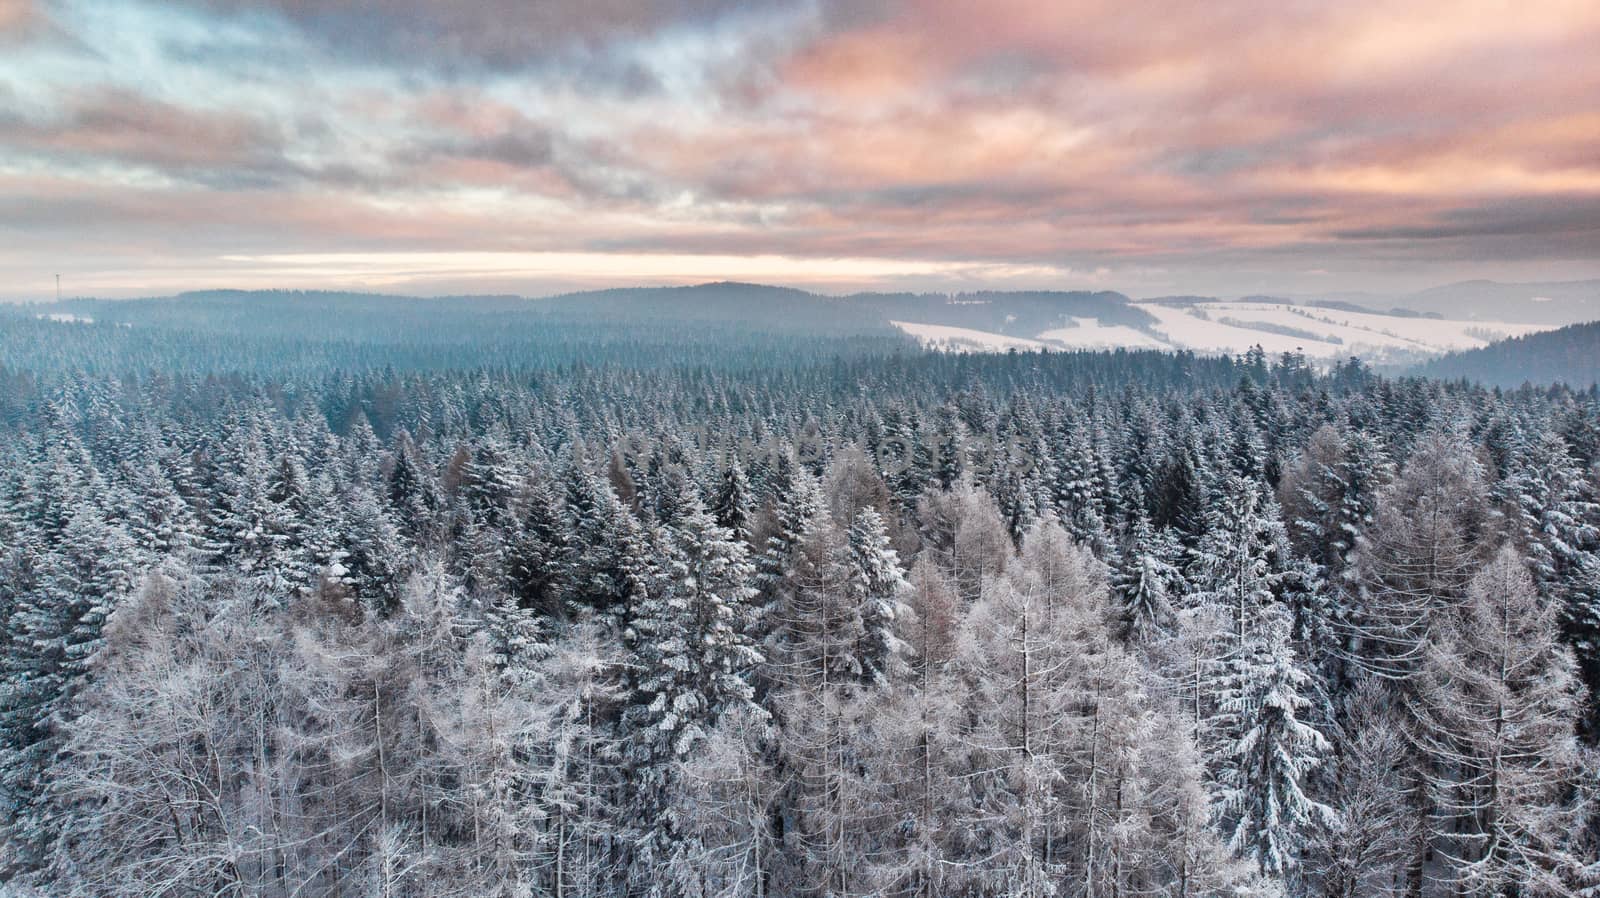 Sunrise Over Snowy Pine Trees. Beautiful Sky and Clouds. Aerial  by merc67